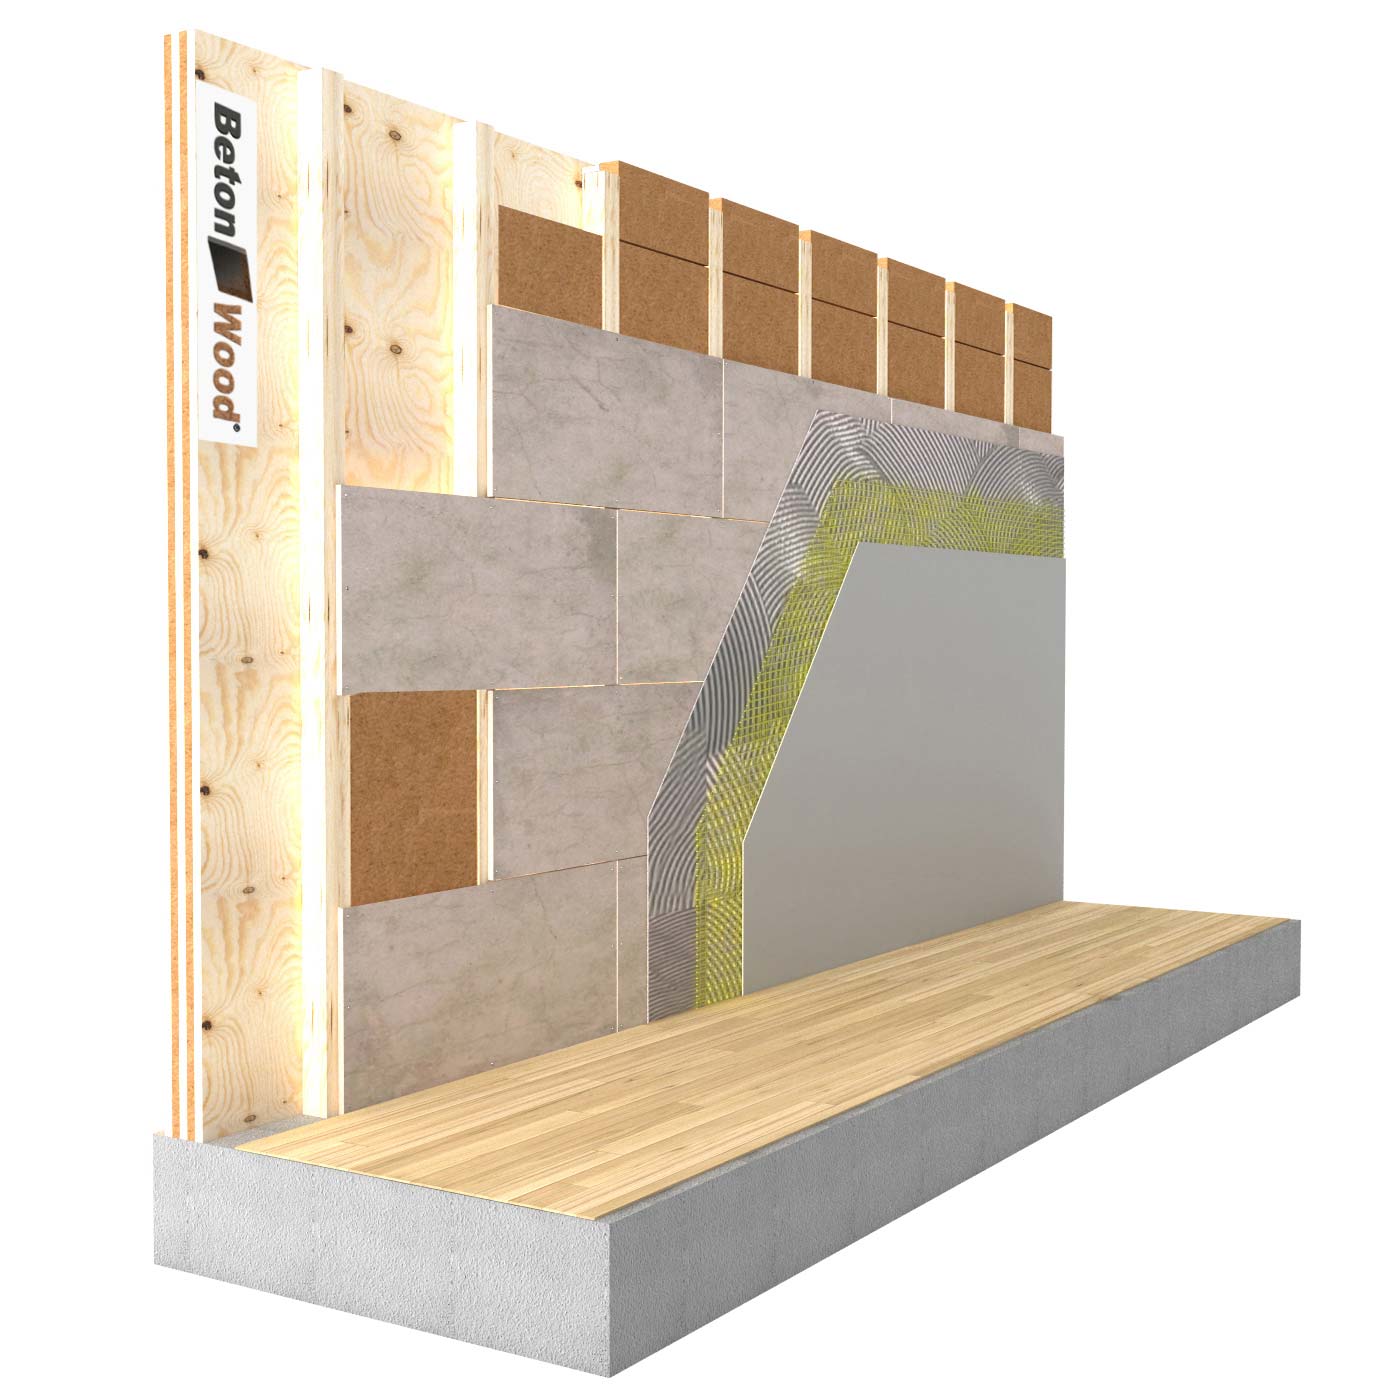 Internal insulation system in Wood fiber and cement bonded particle board